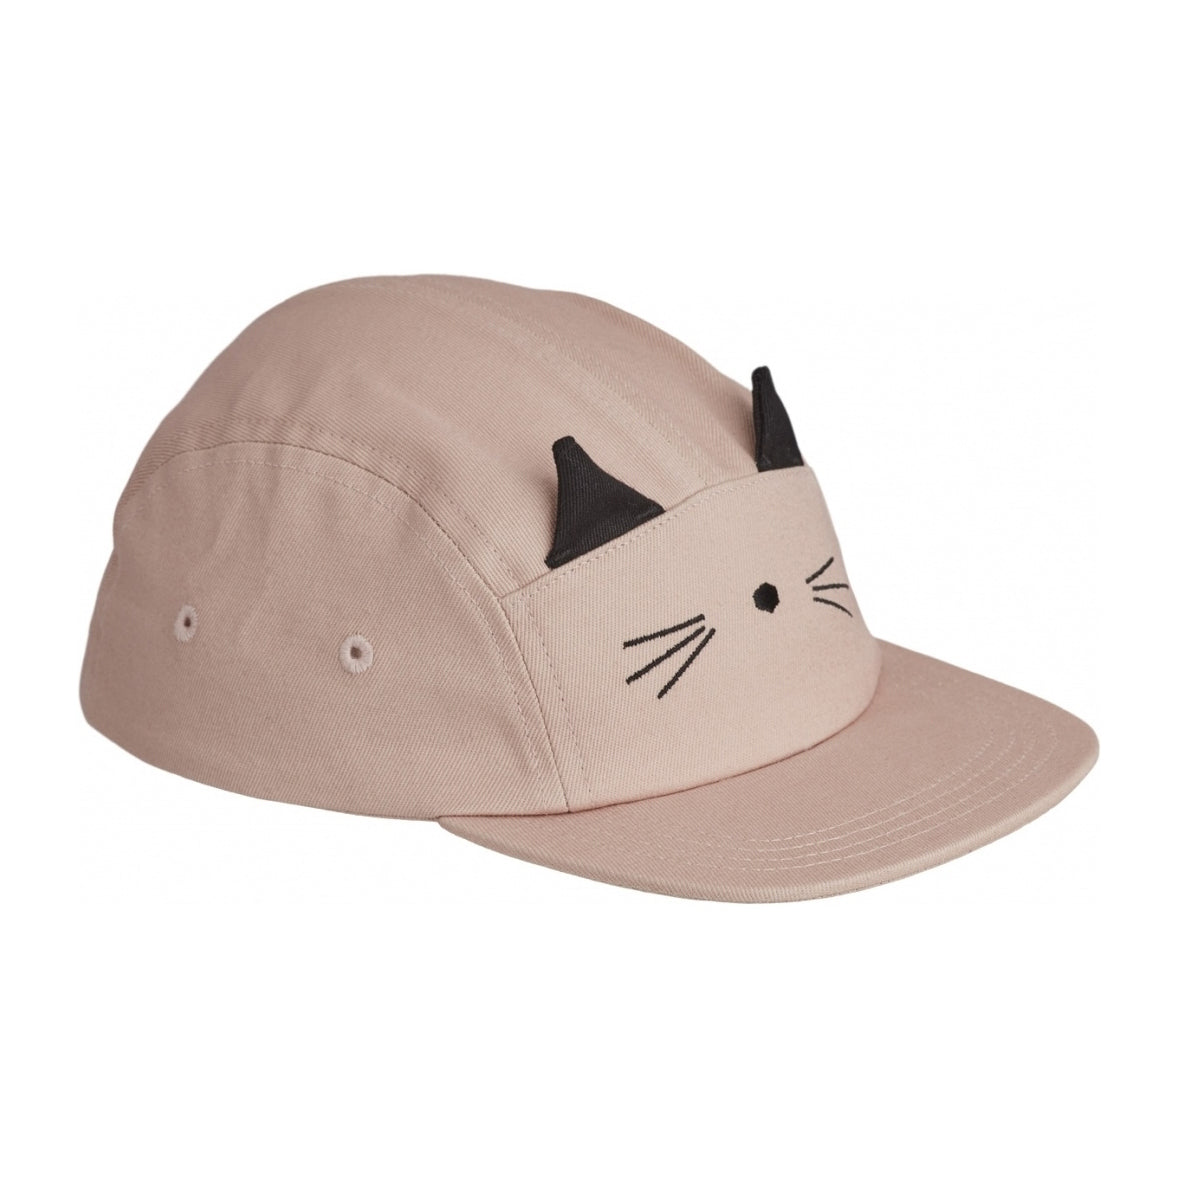 RORY CAT CAP (Available in 2 colors)